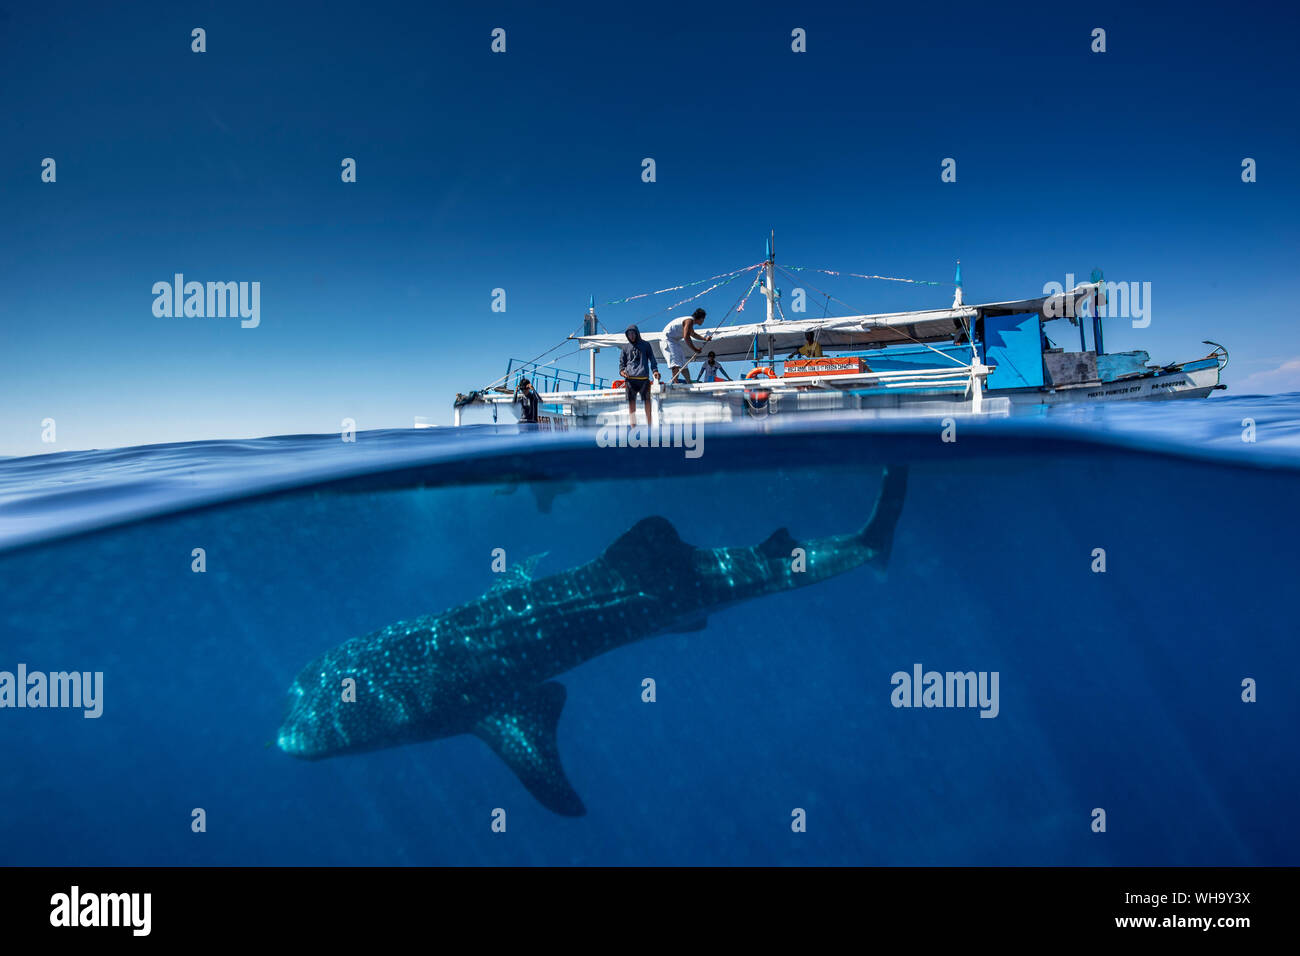 Whale shark (Rhincodon typus) below a banca boat in Honda Bay, Palawan, The Philippines, Southeast Asia, Asia Stock Photo